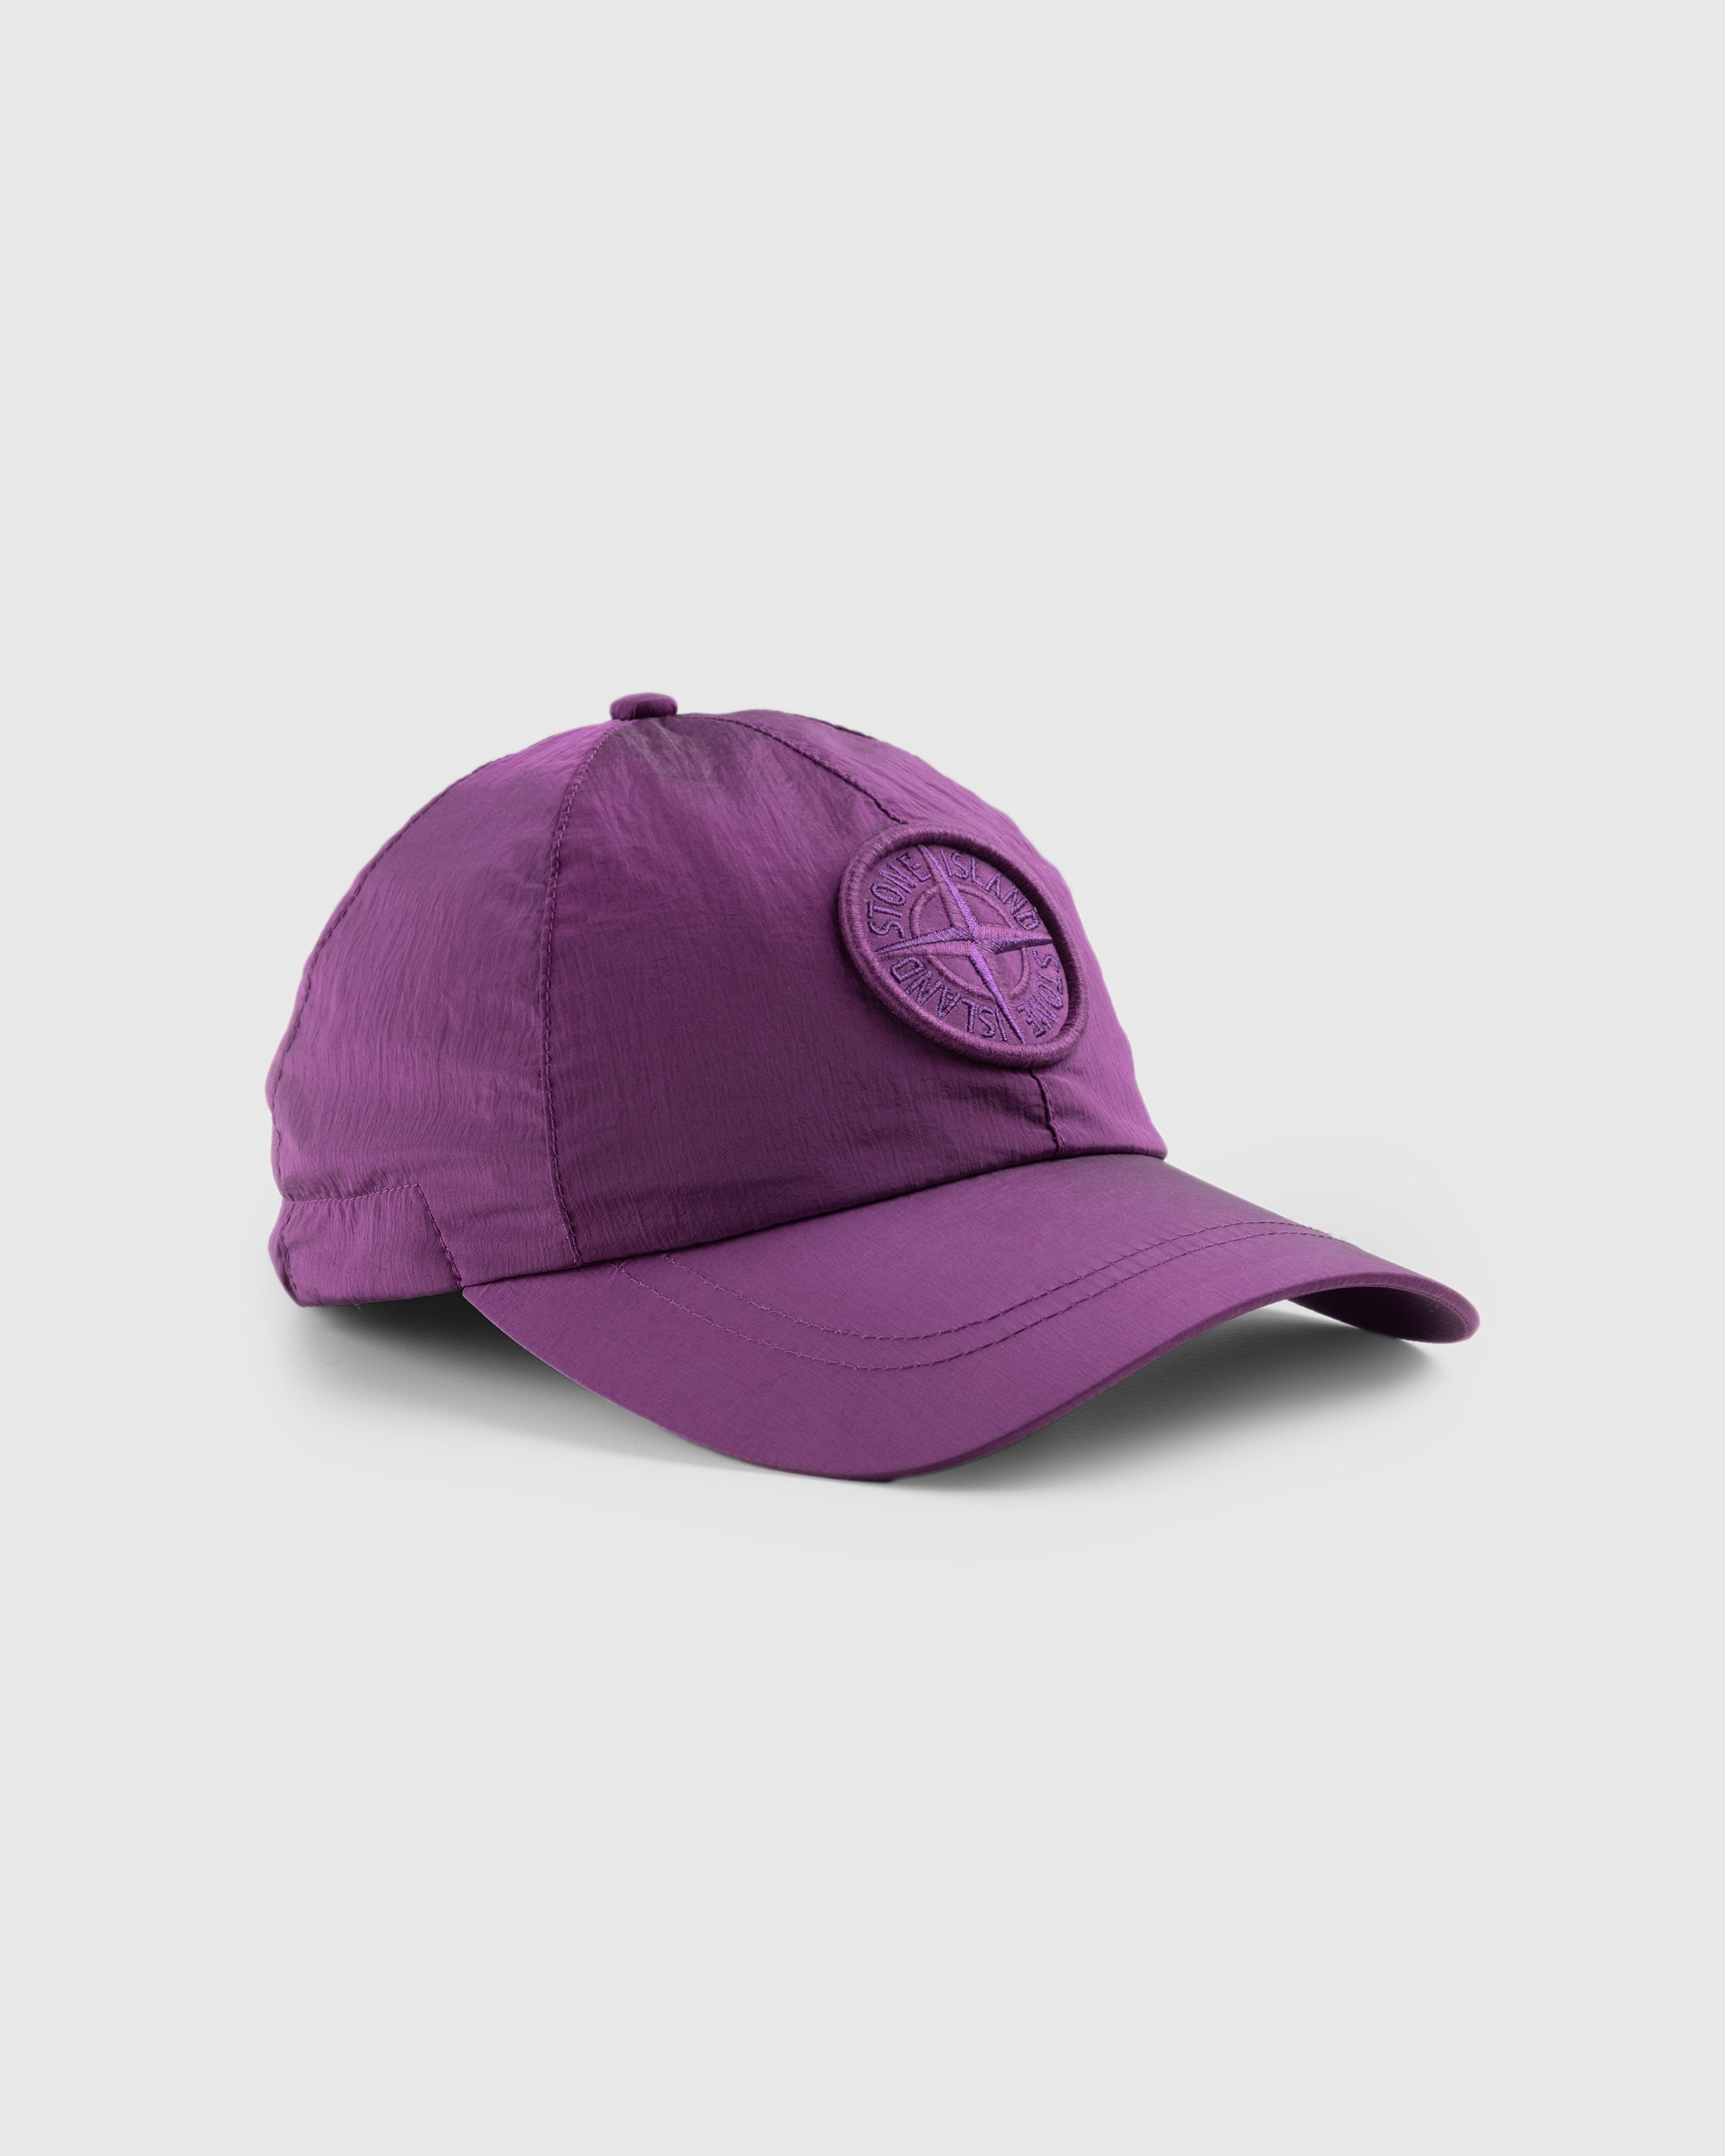 Stone Island - Cappello Pink 781599576 - Accessories - Pink - Image 1